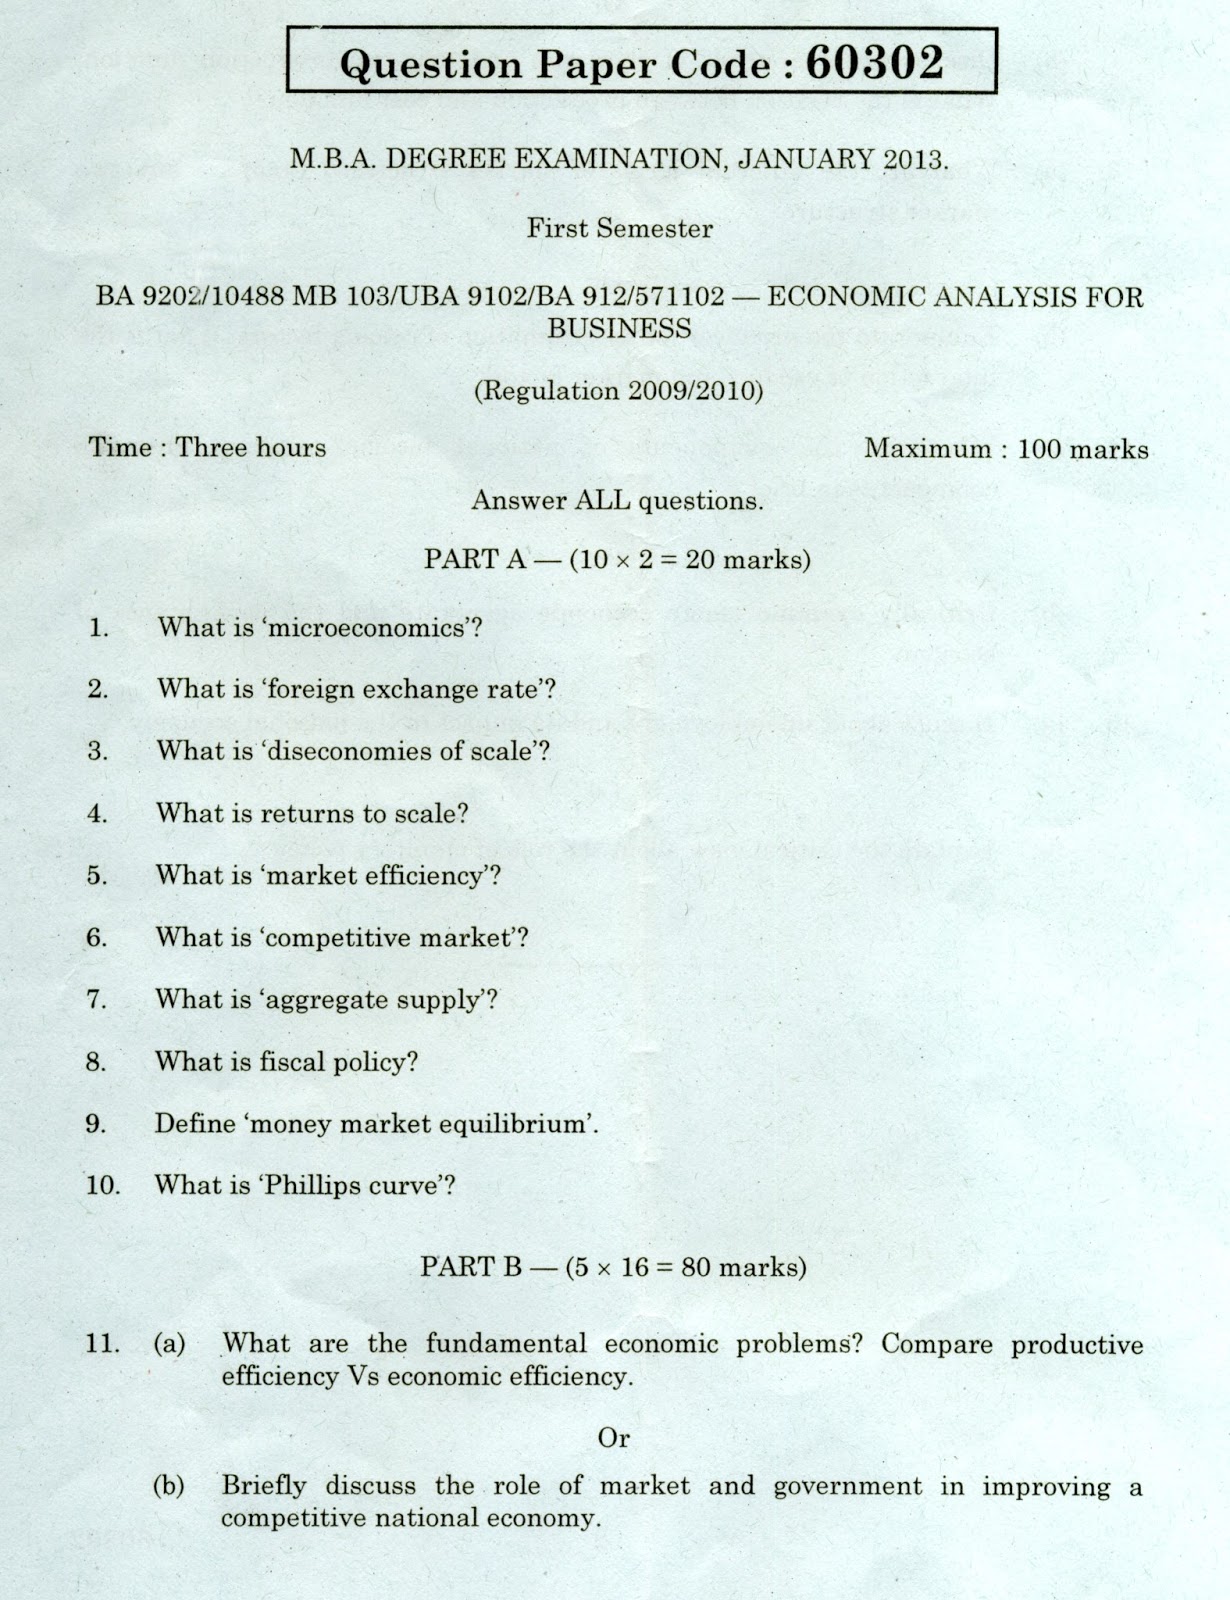 QUESTION PAPER ECONOMIC ANALYSIS FOR BUSINESS ANNA UNIVERSITY CHENNAI ...